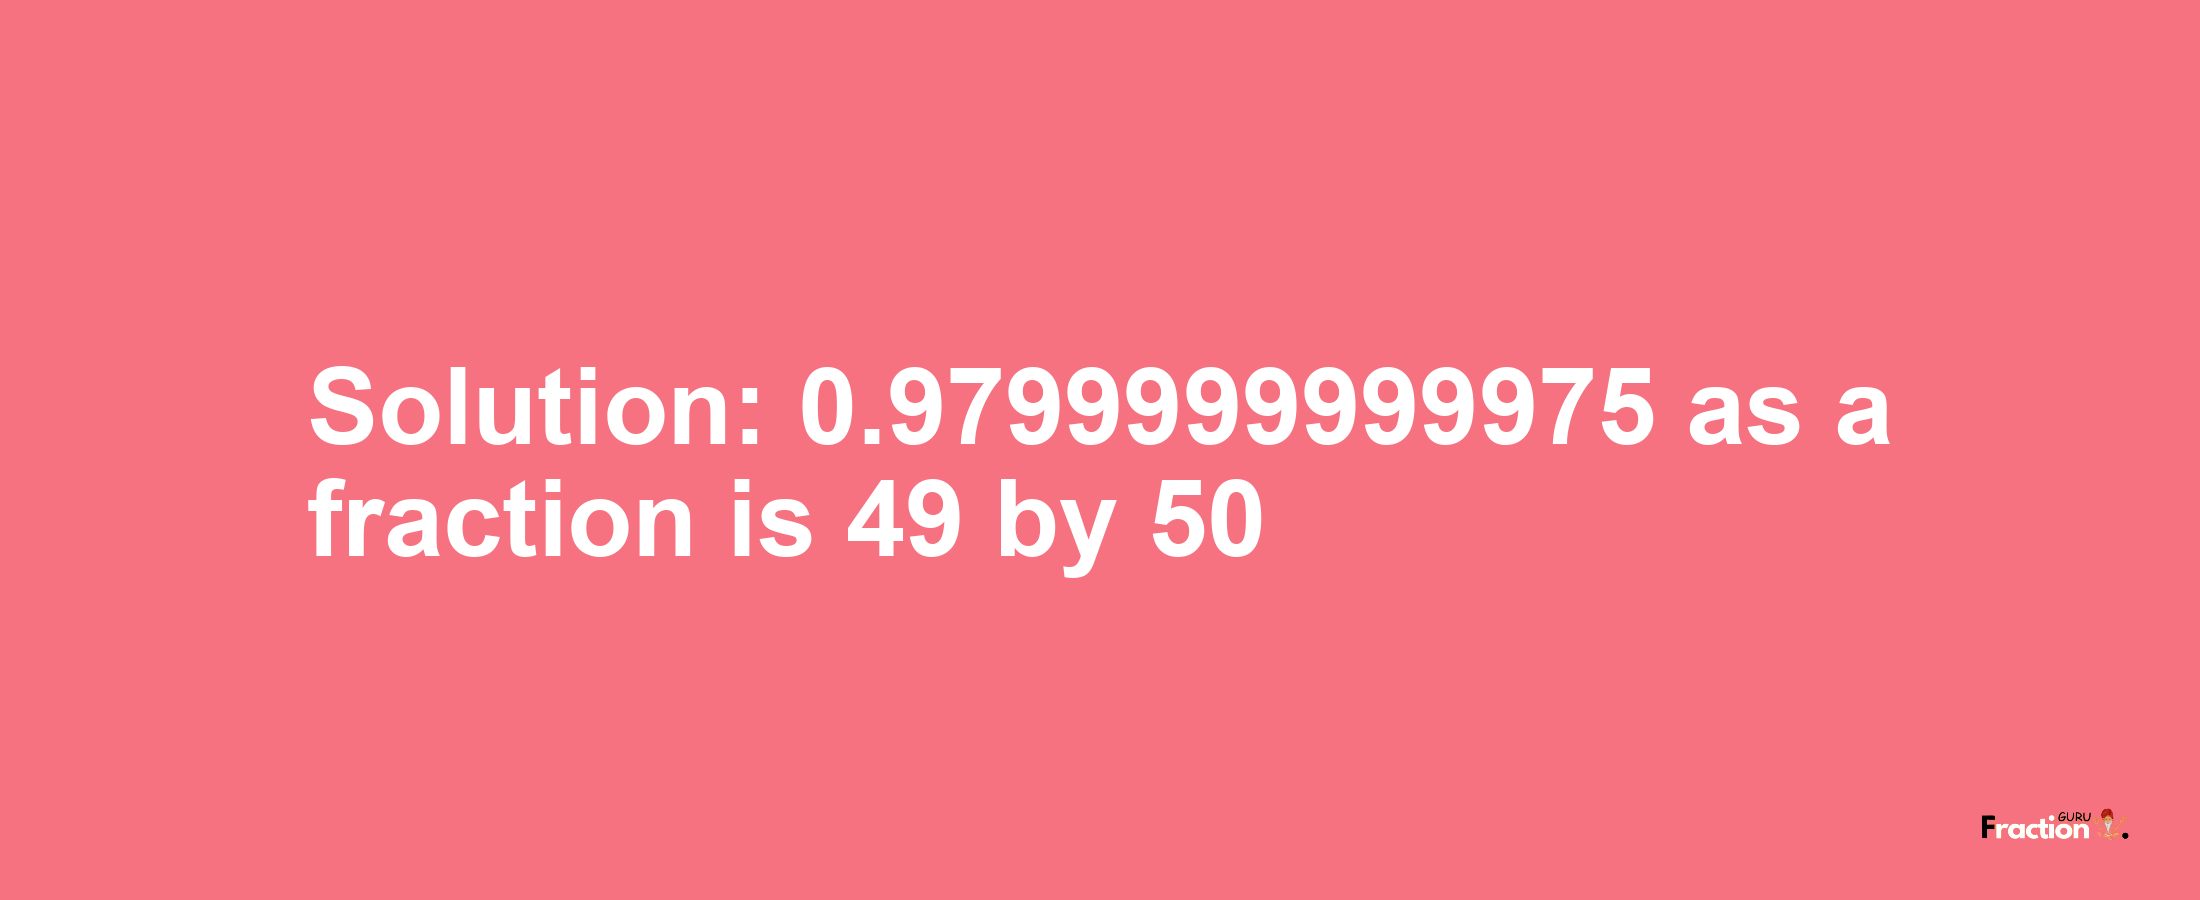 Solution:0.9799999999975 as a fraction is 49/50